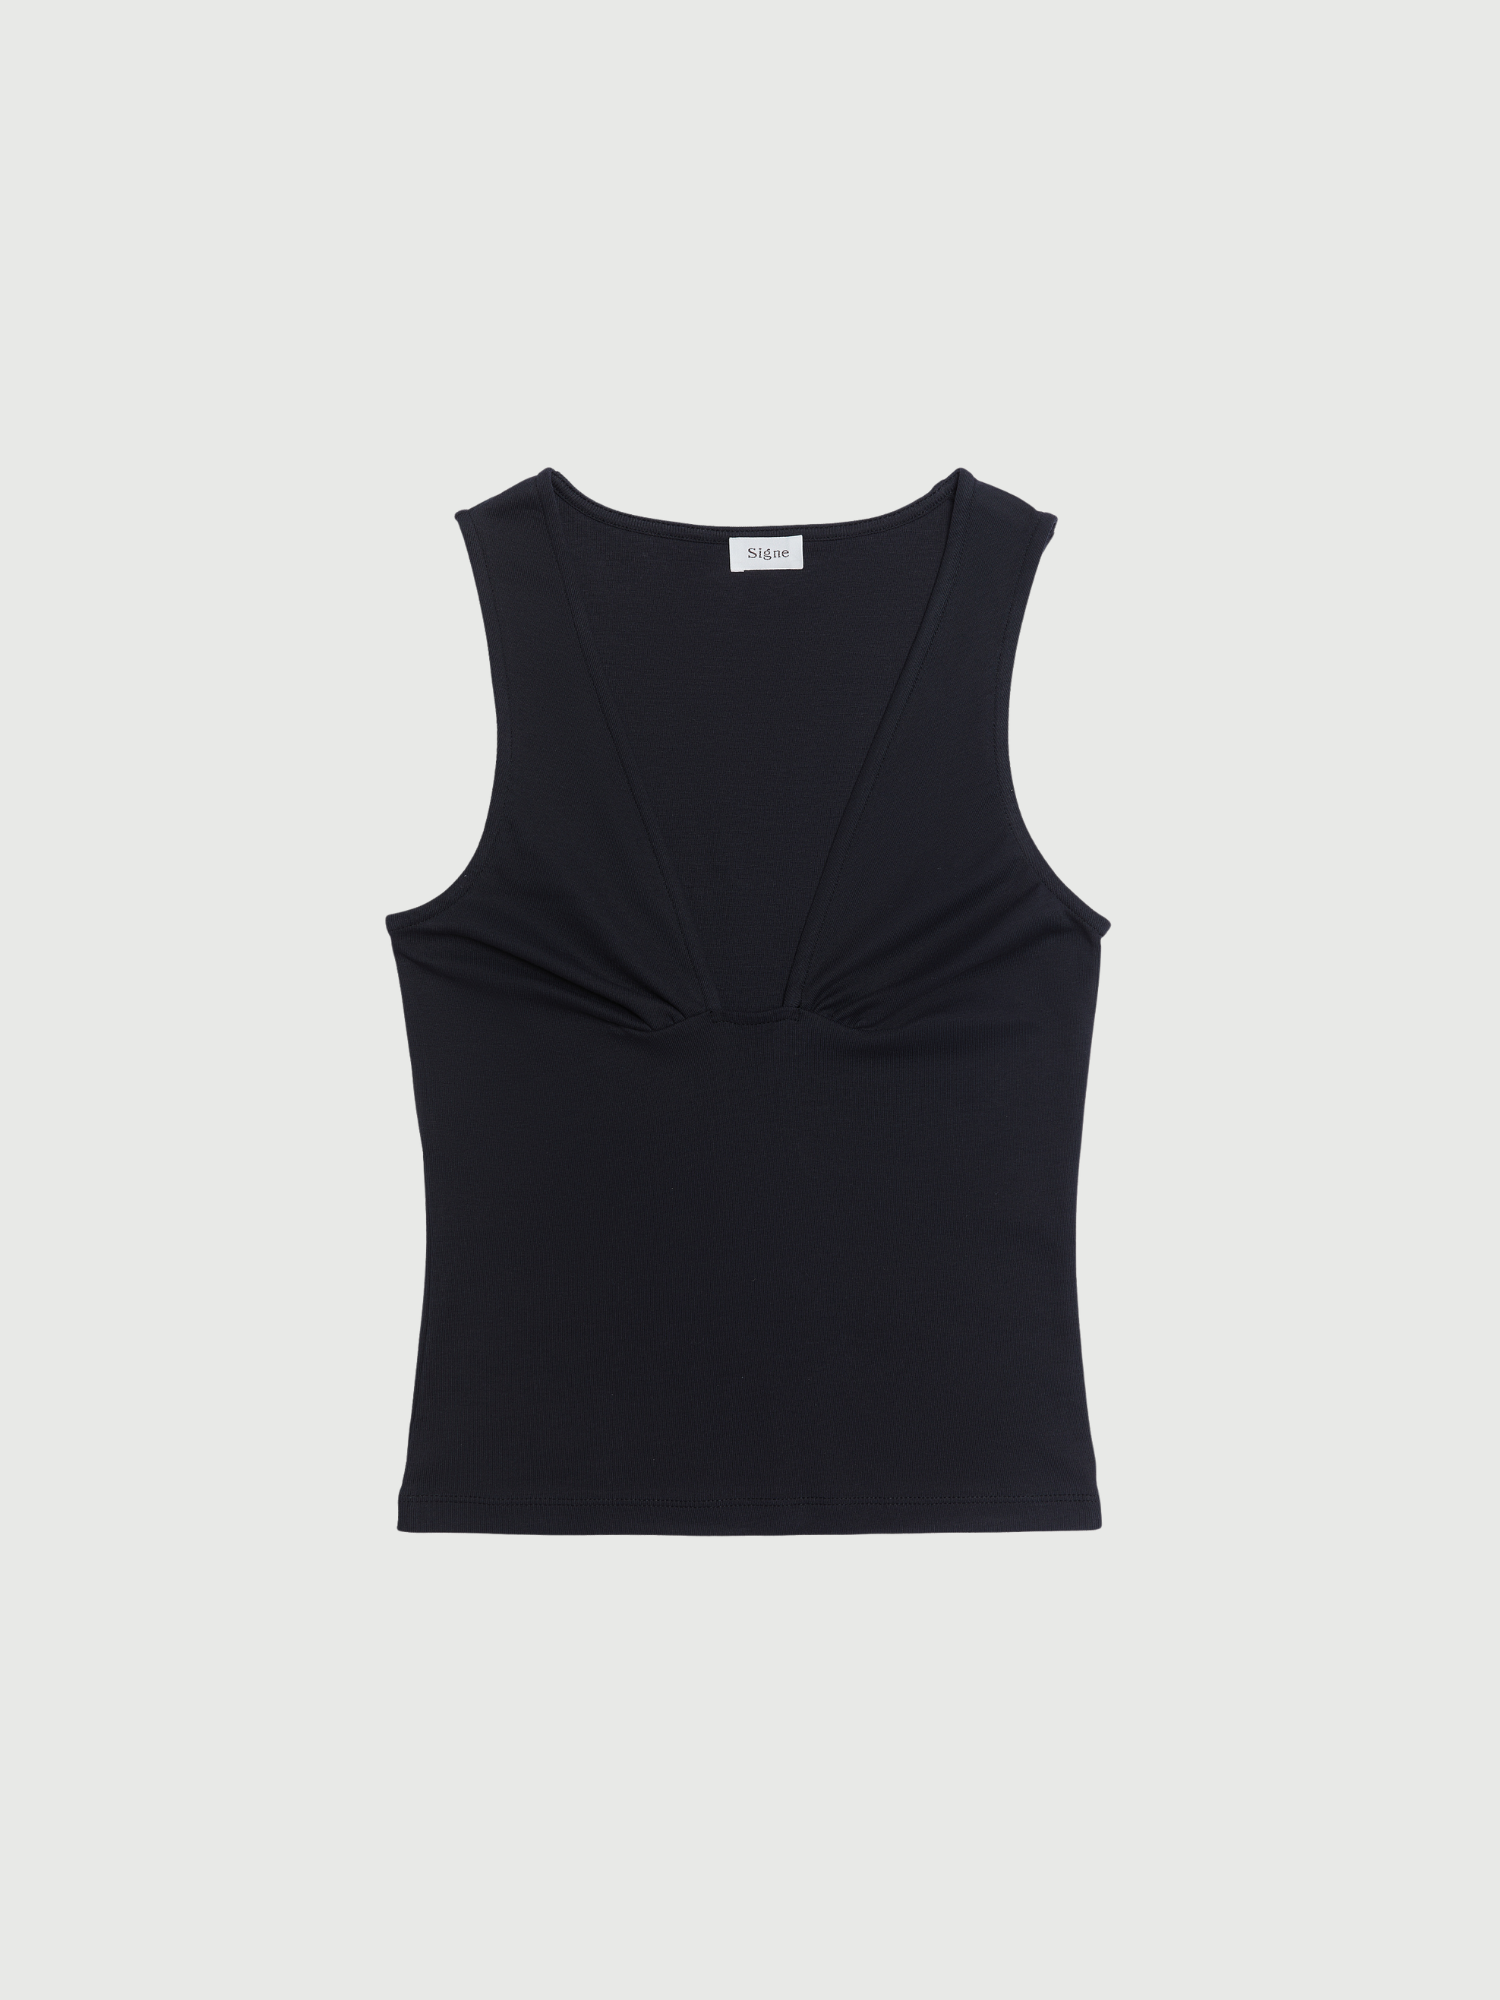 Black Square Neck Top  | By Signe